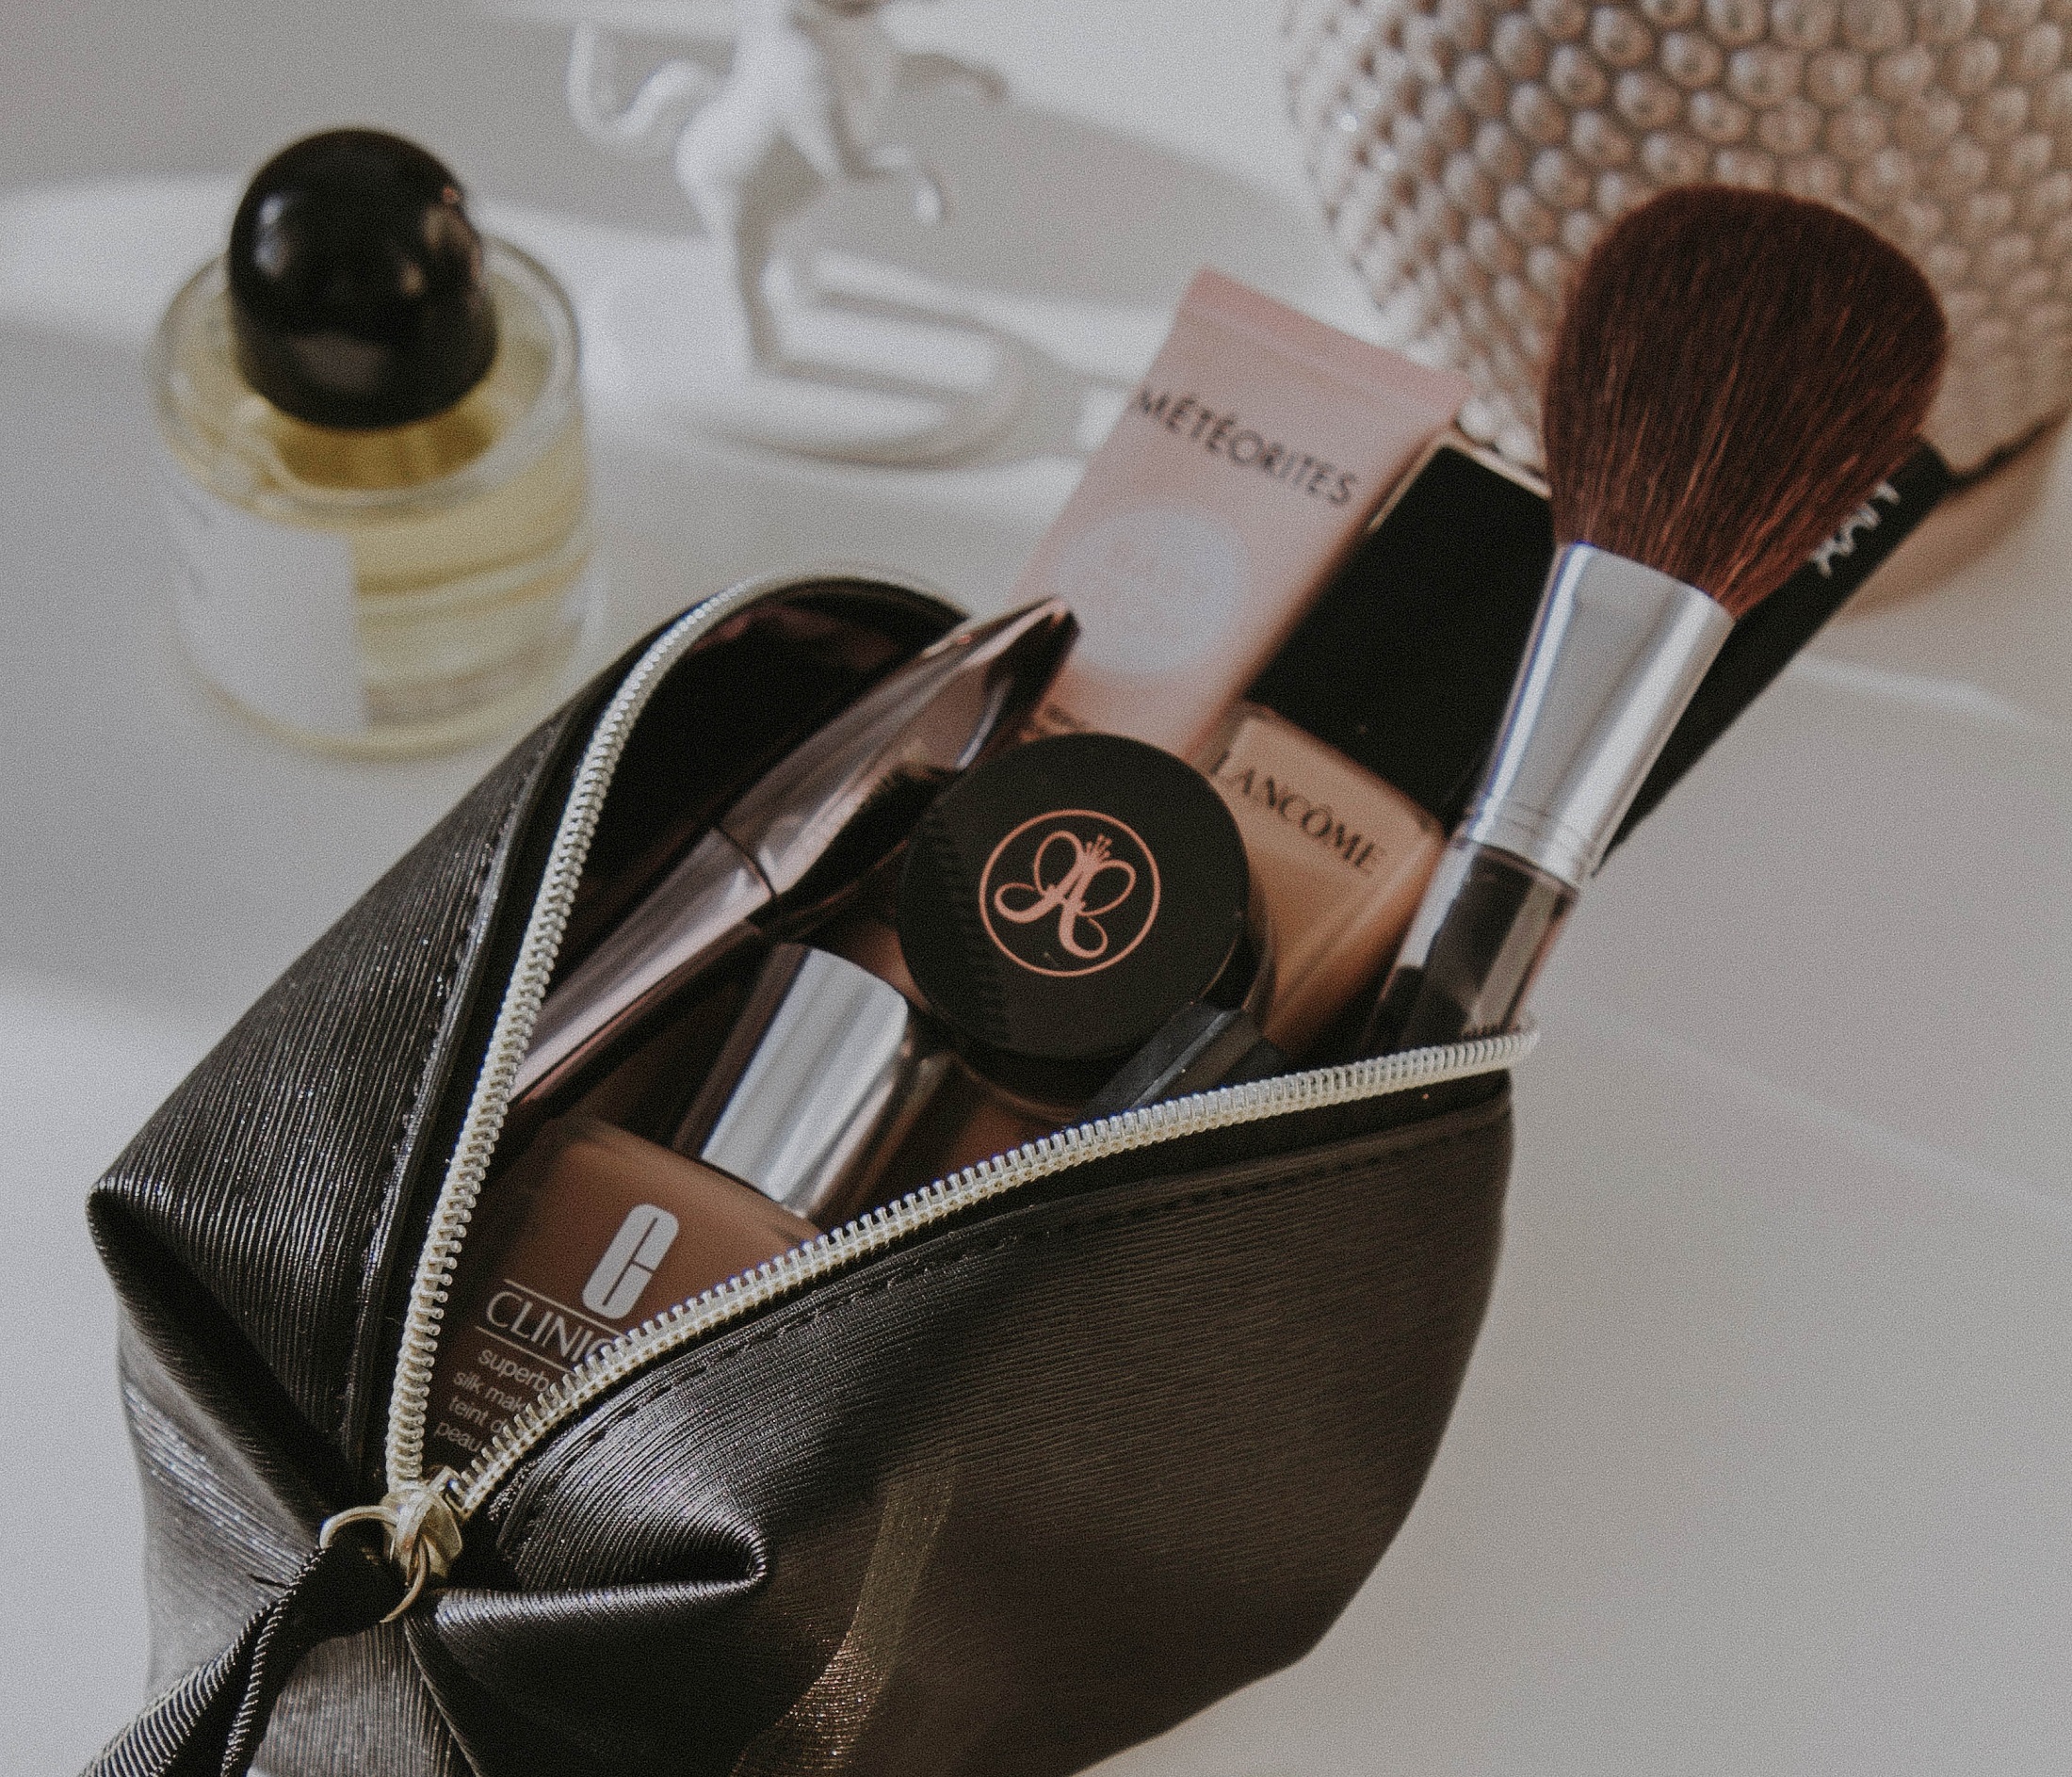 5 cosmetics you will find in every minimalist’s make-up bag